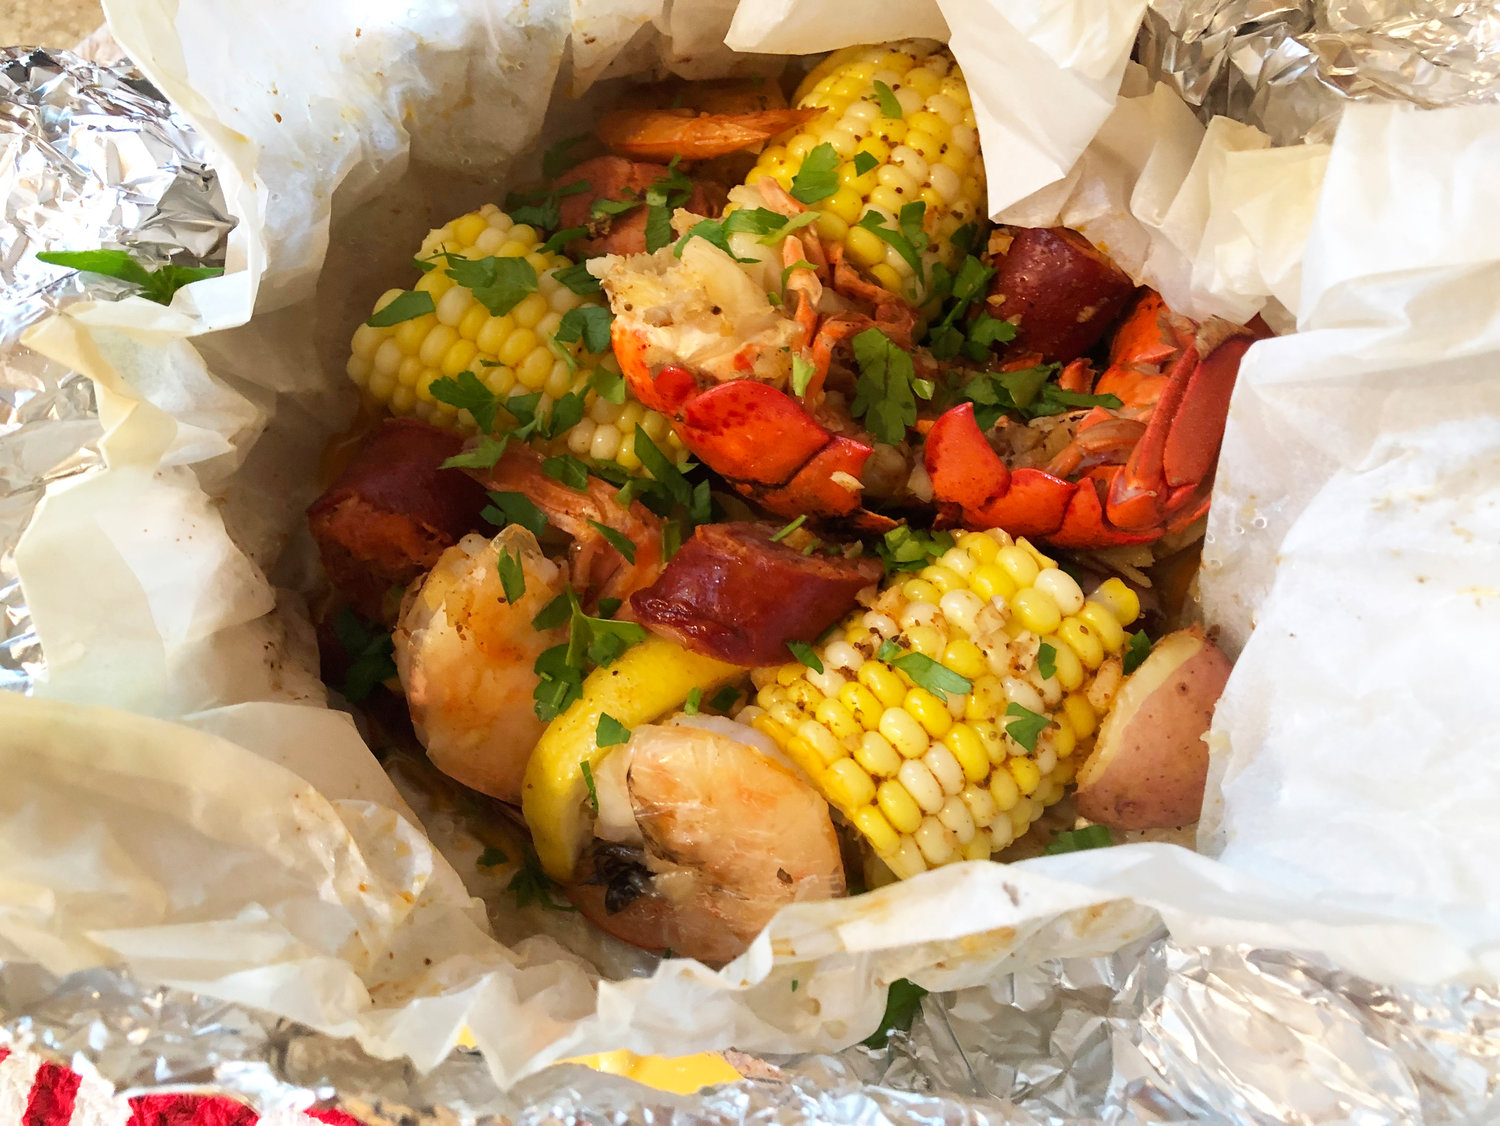 This recipe inspired by Yankee Magazine calls for “grill pouches” filled with classic seafood and vegetables.